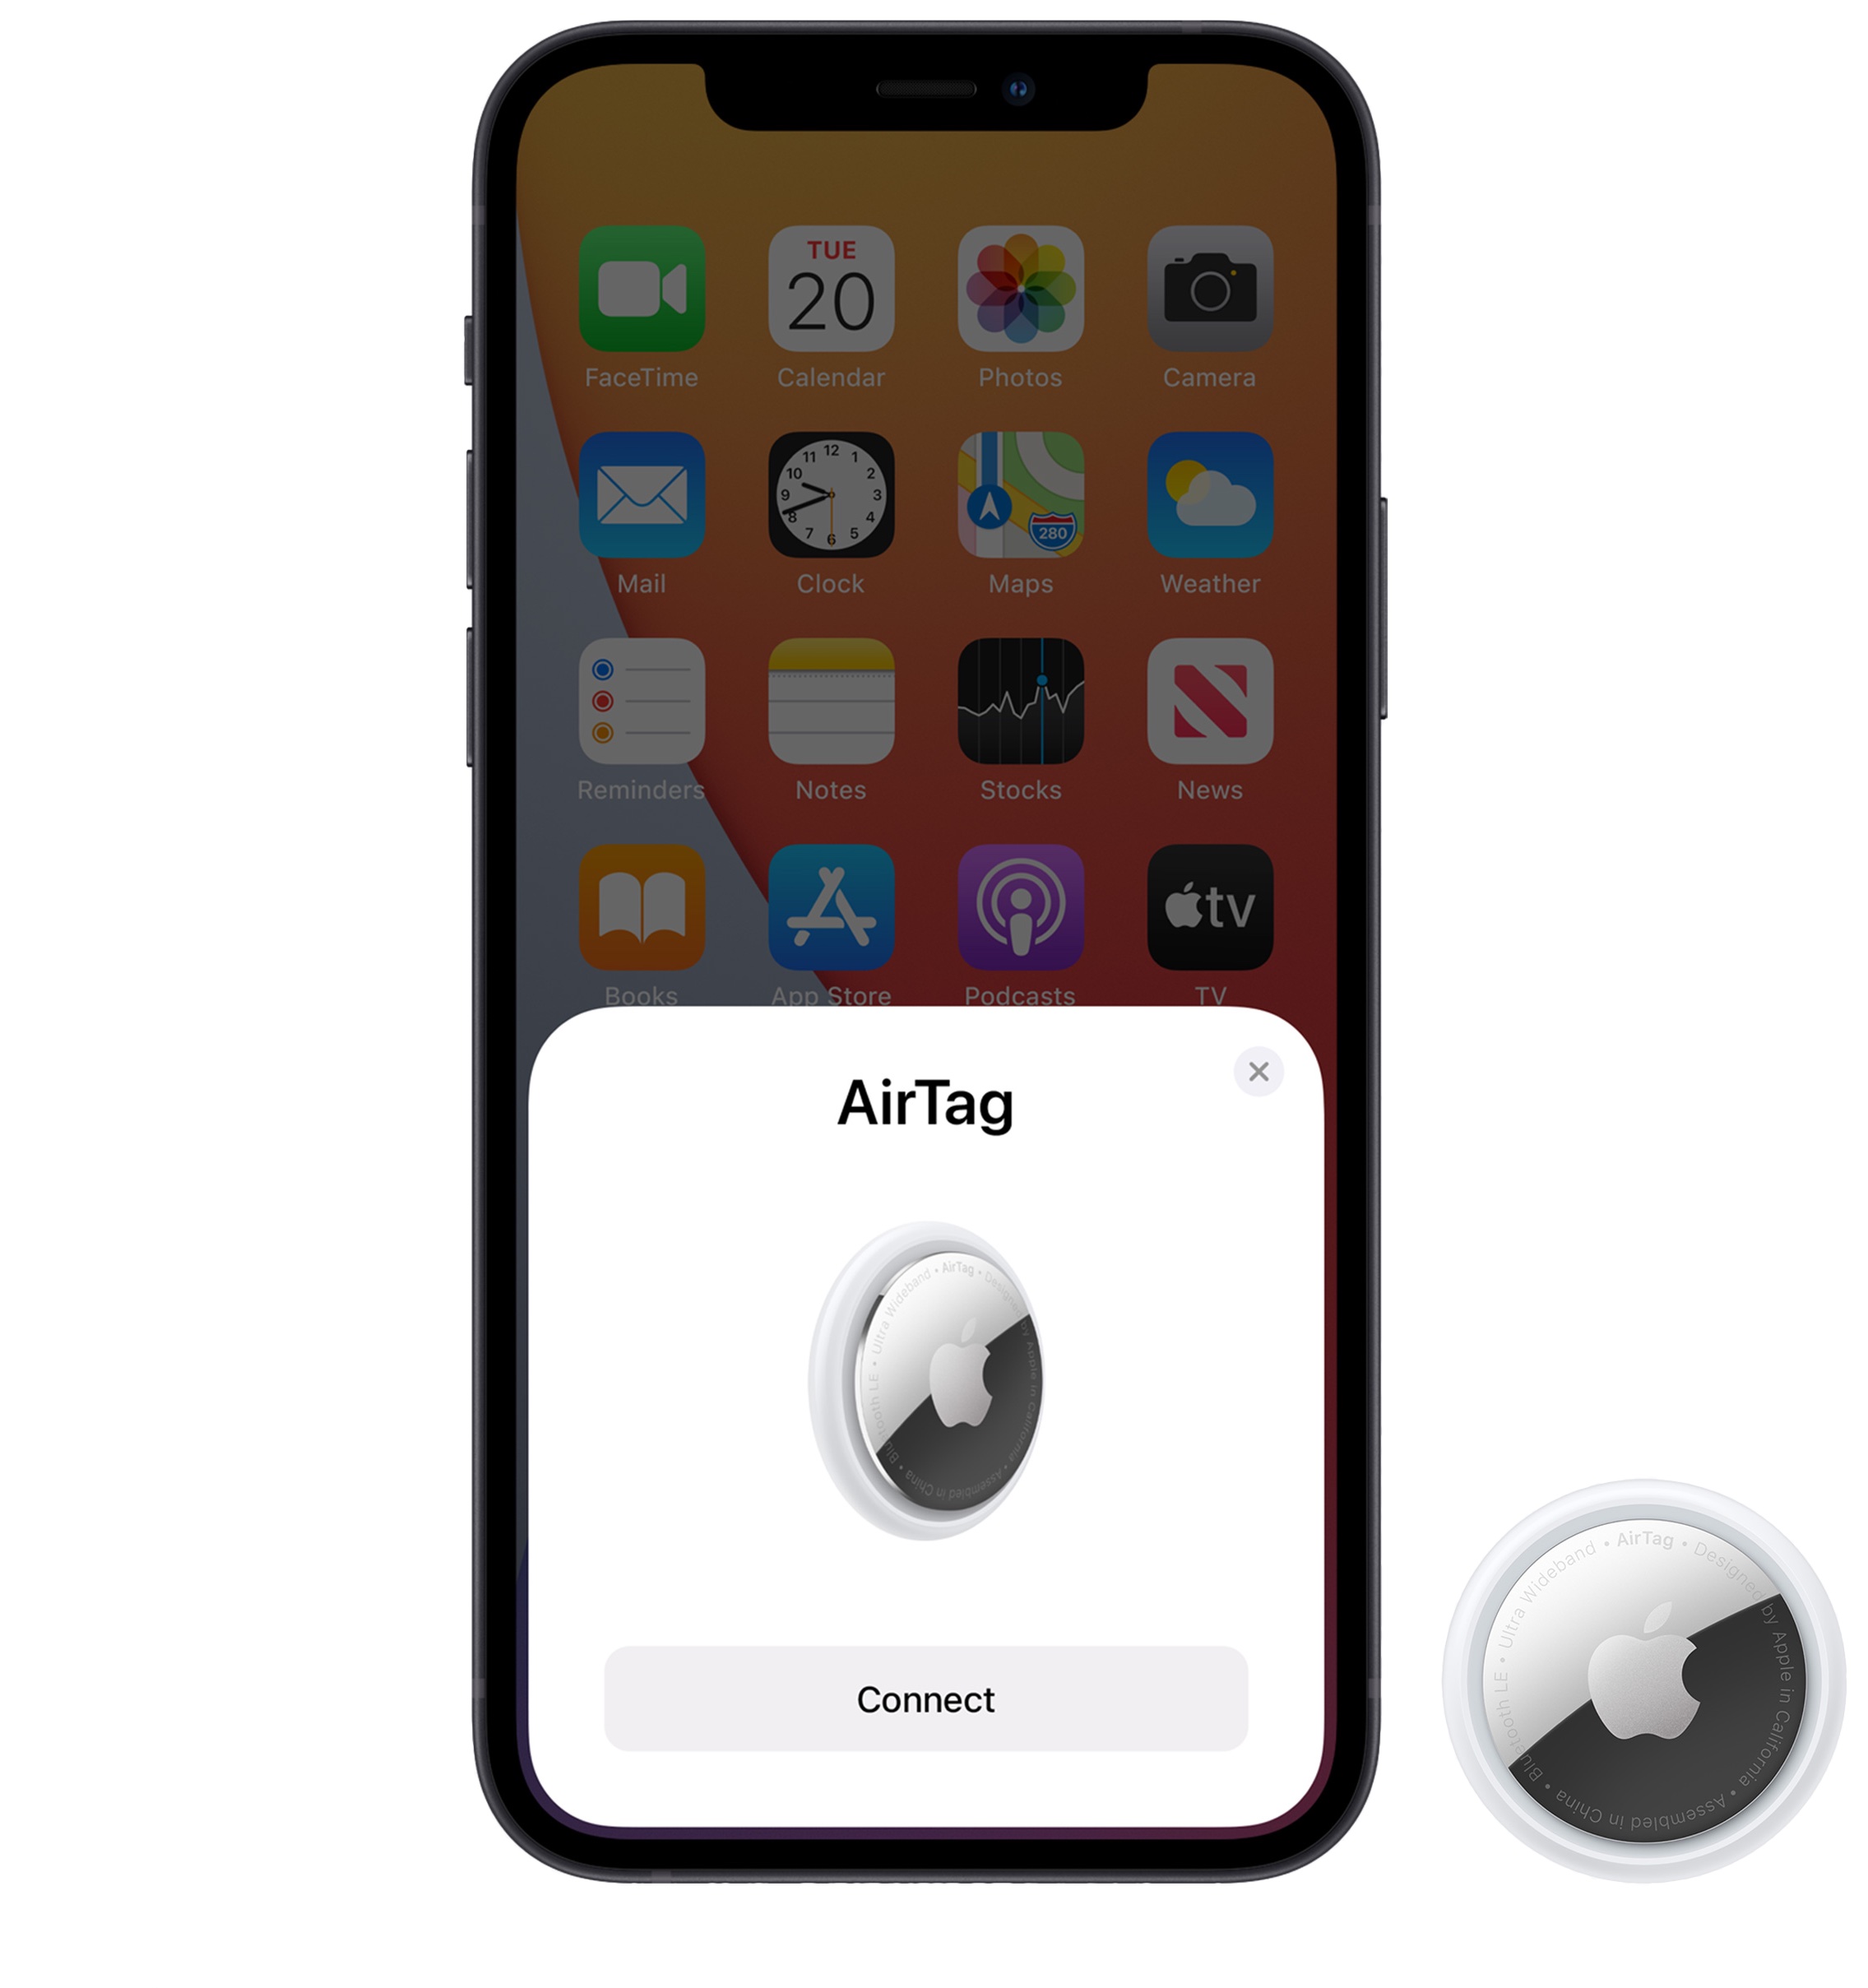 A promotional image from Apple showing the pairing process for the AirTag personal item tracker with an iPhone displaying the AirTag Connect card